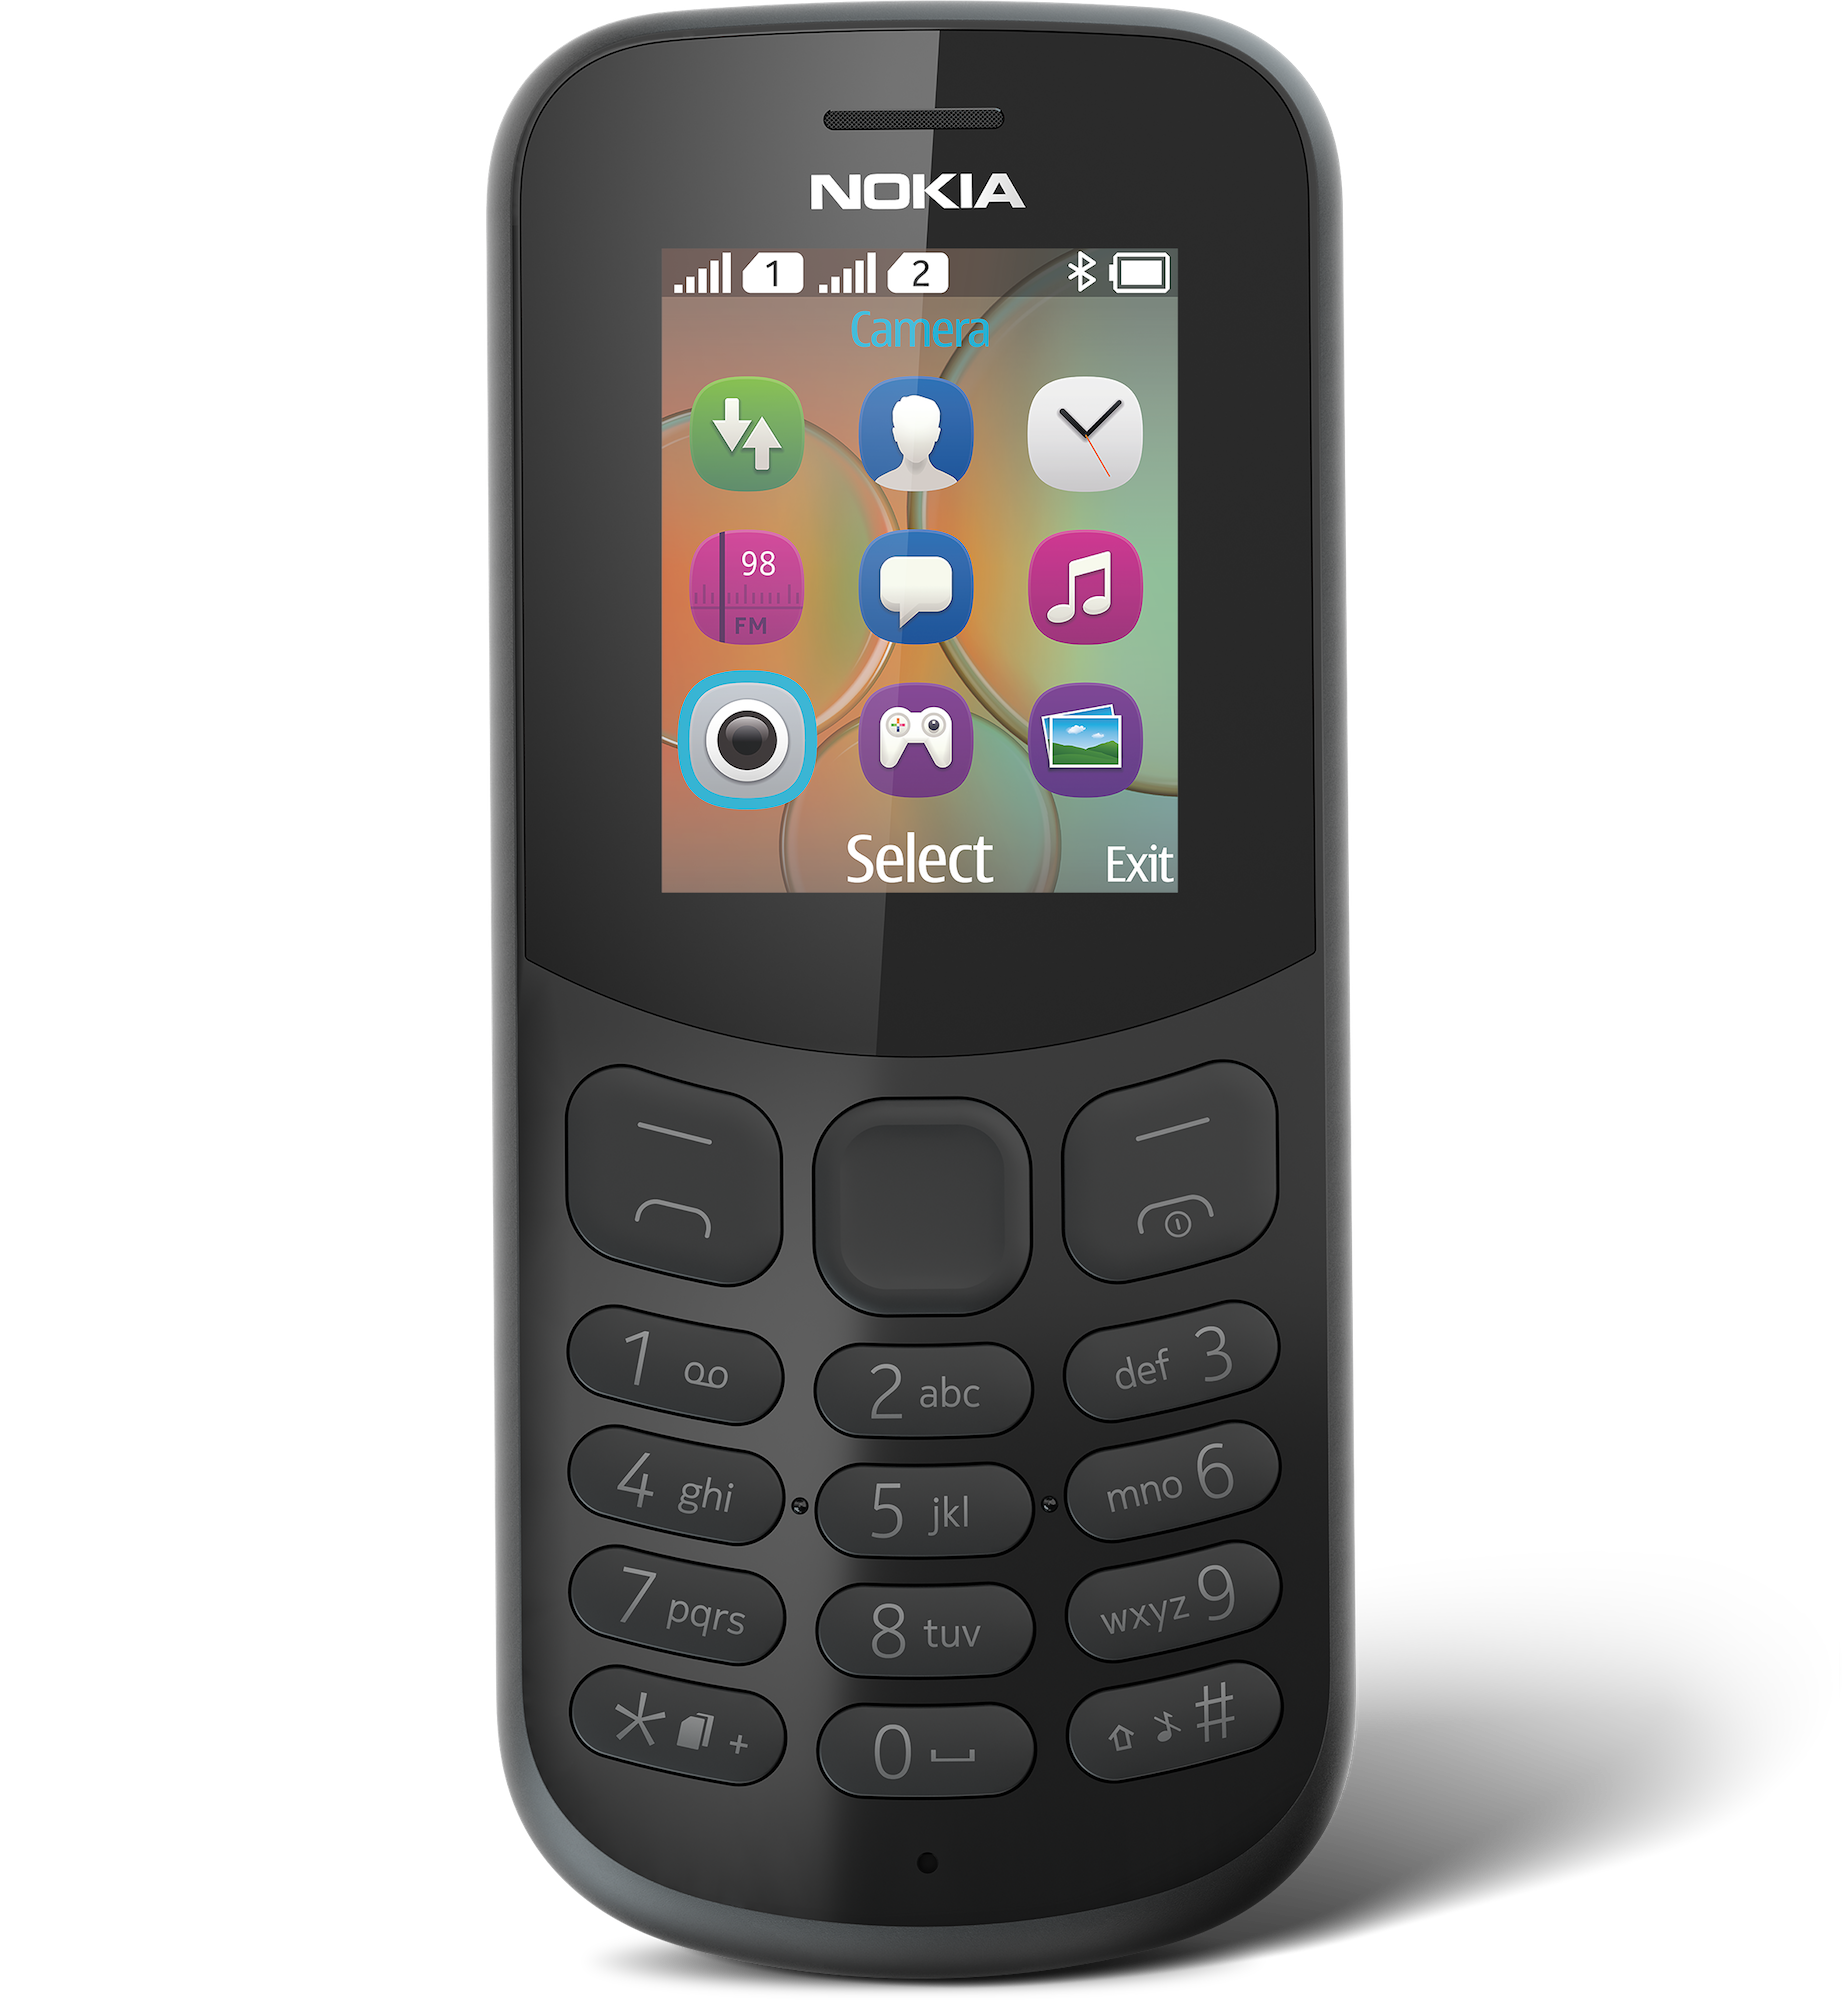 Nokia 130
Feed your playful side